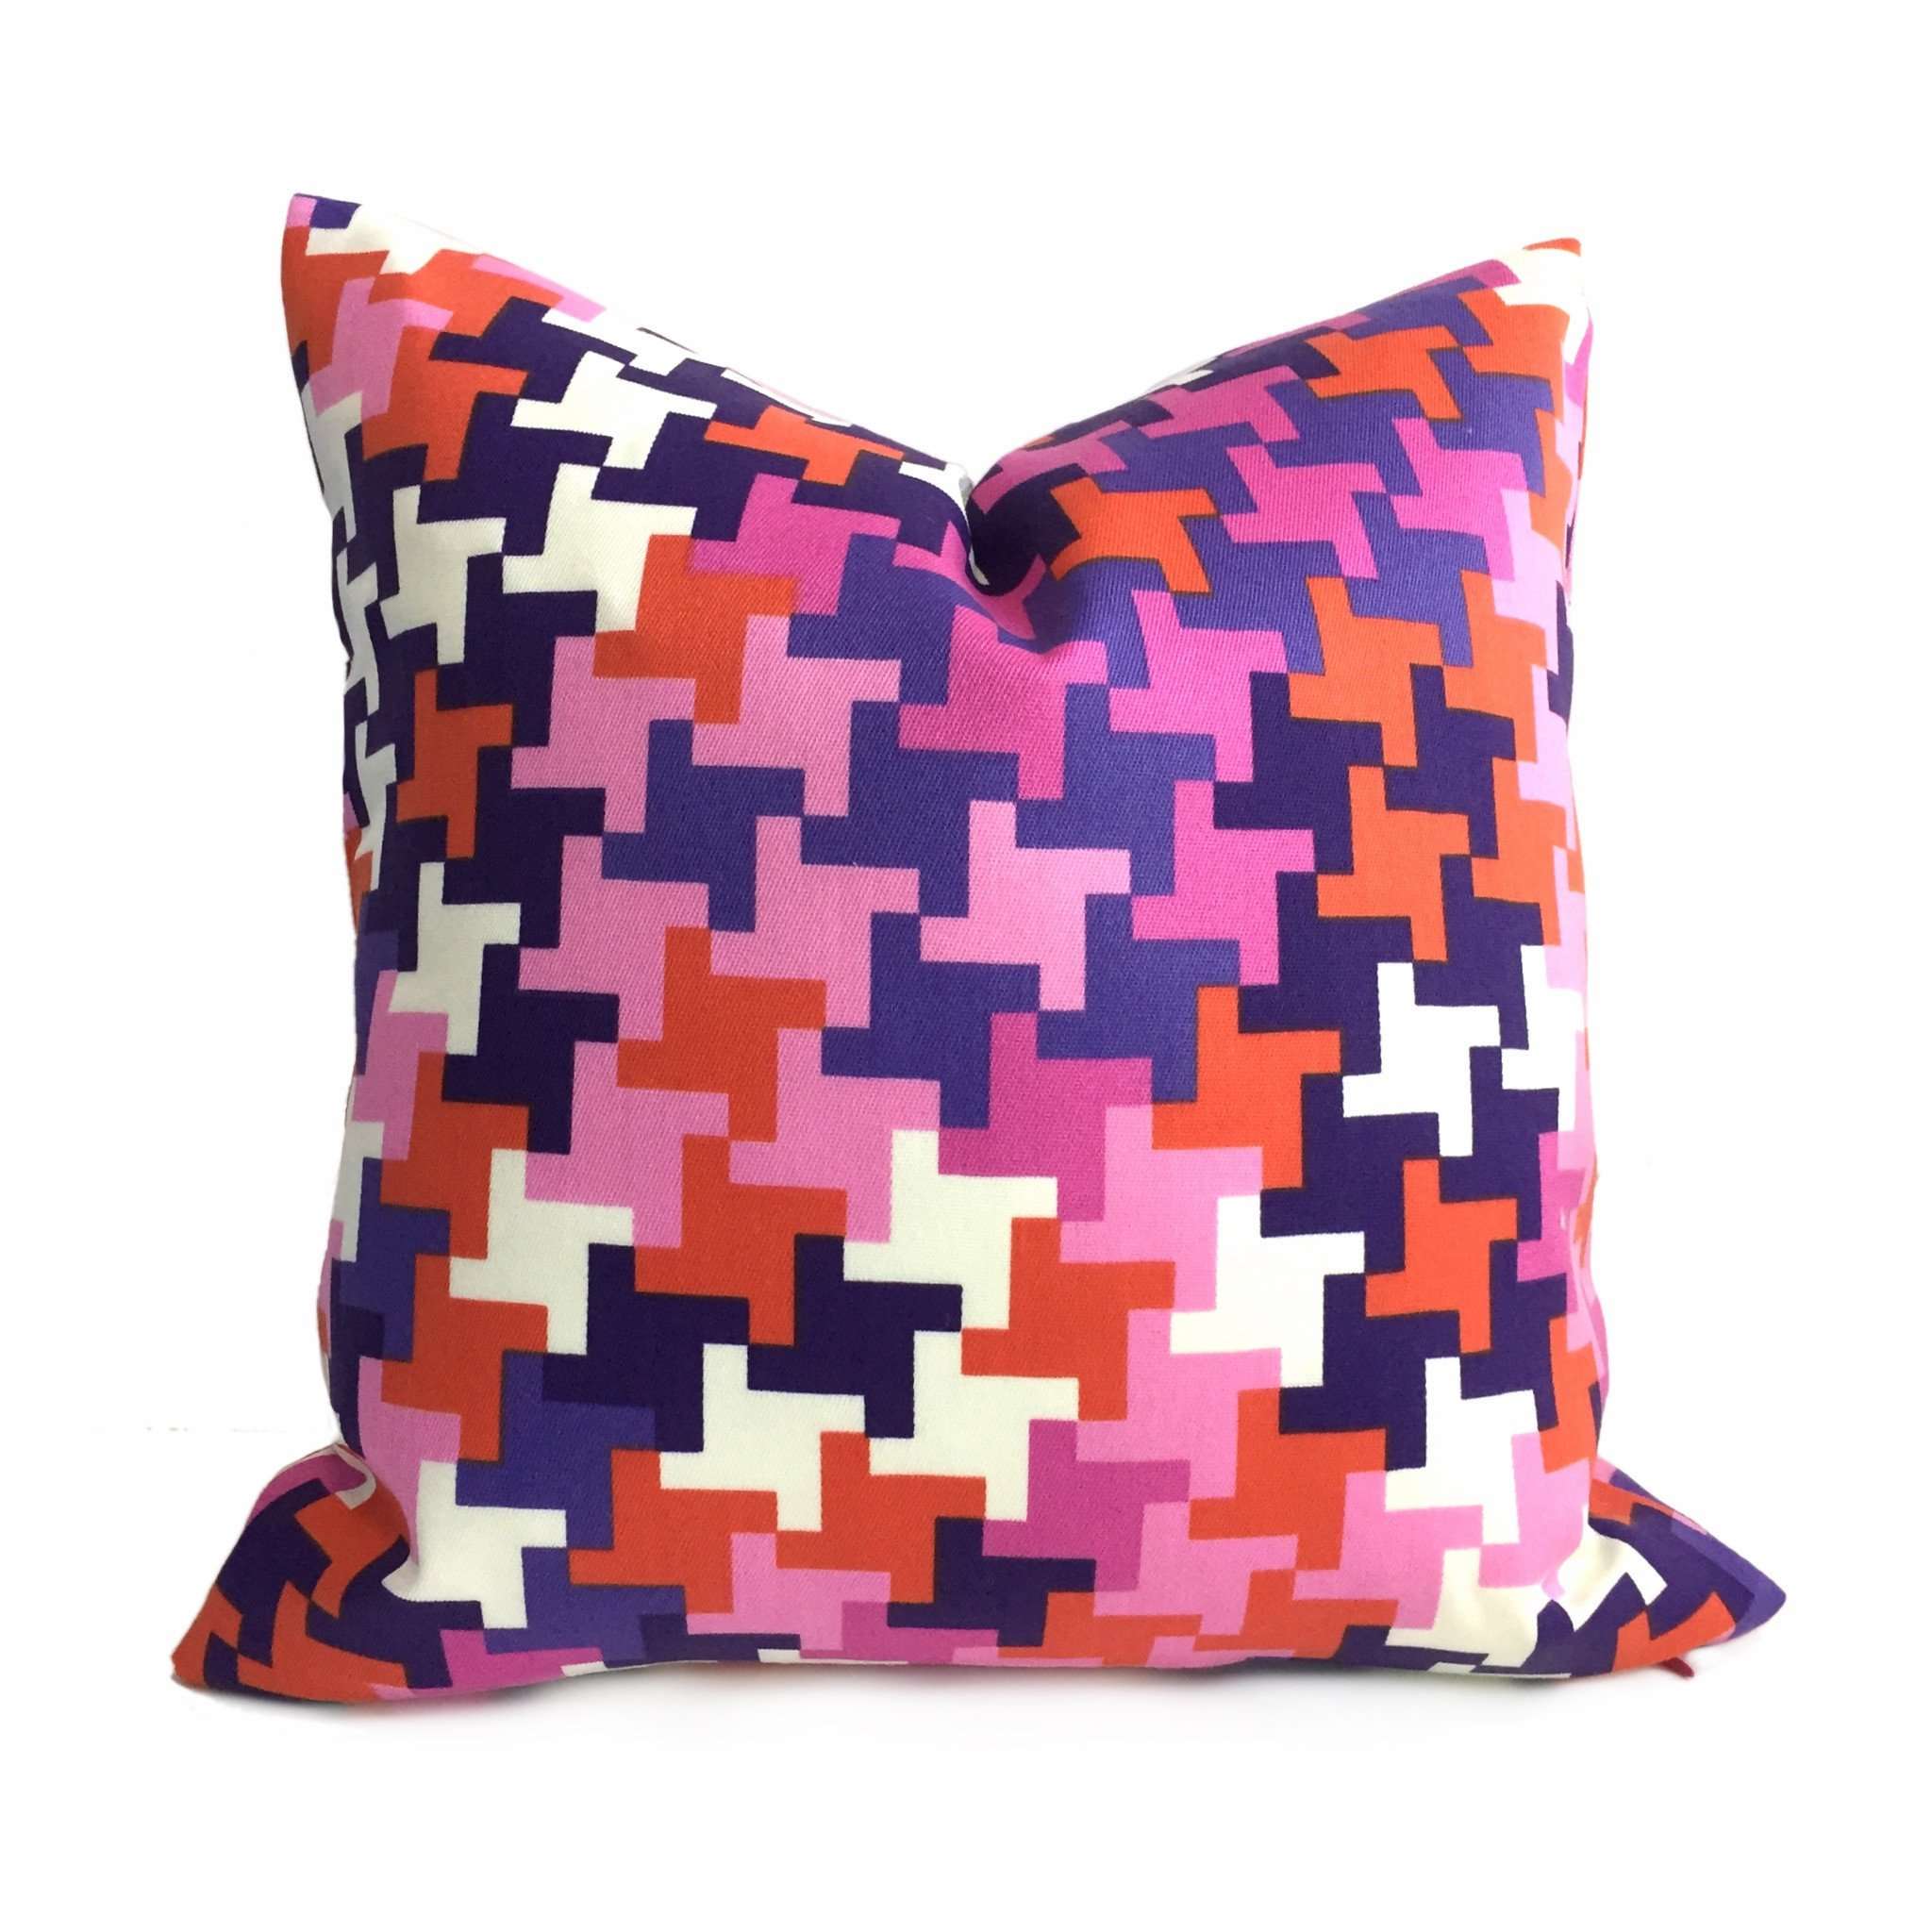 https://cdn.shopify.com/s/files/1/0936/5222/products/trina-turk-schumacher-jax-modern-houndstooth-pink-purple-red-indoor-outdoor-pillow-cover-by-aloriam-15083874.jpg?v=1571439461